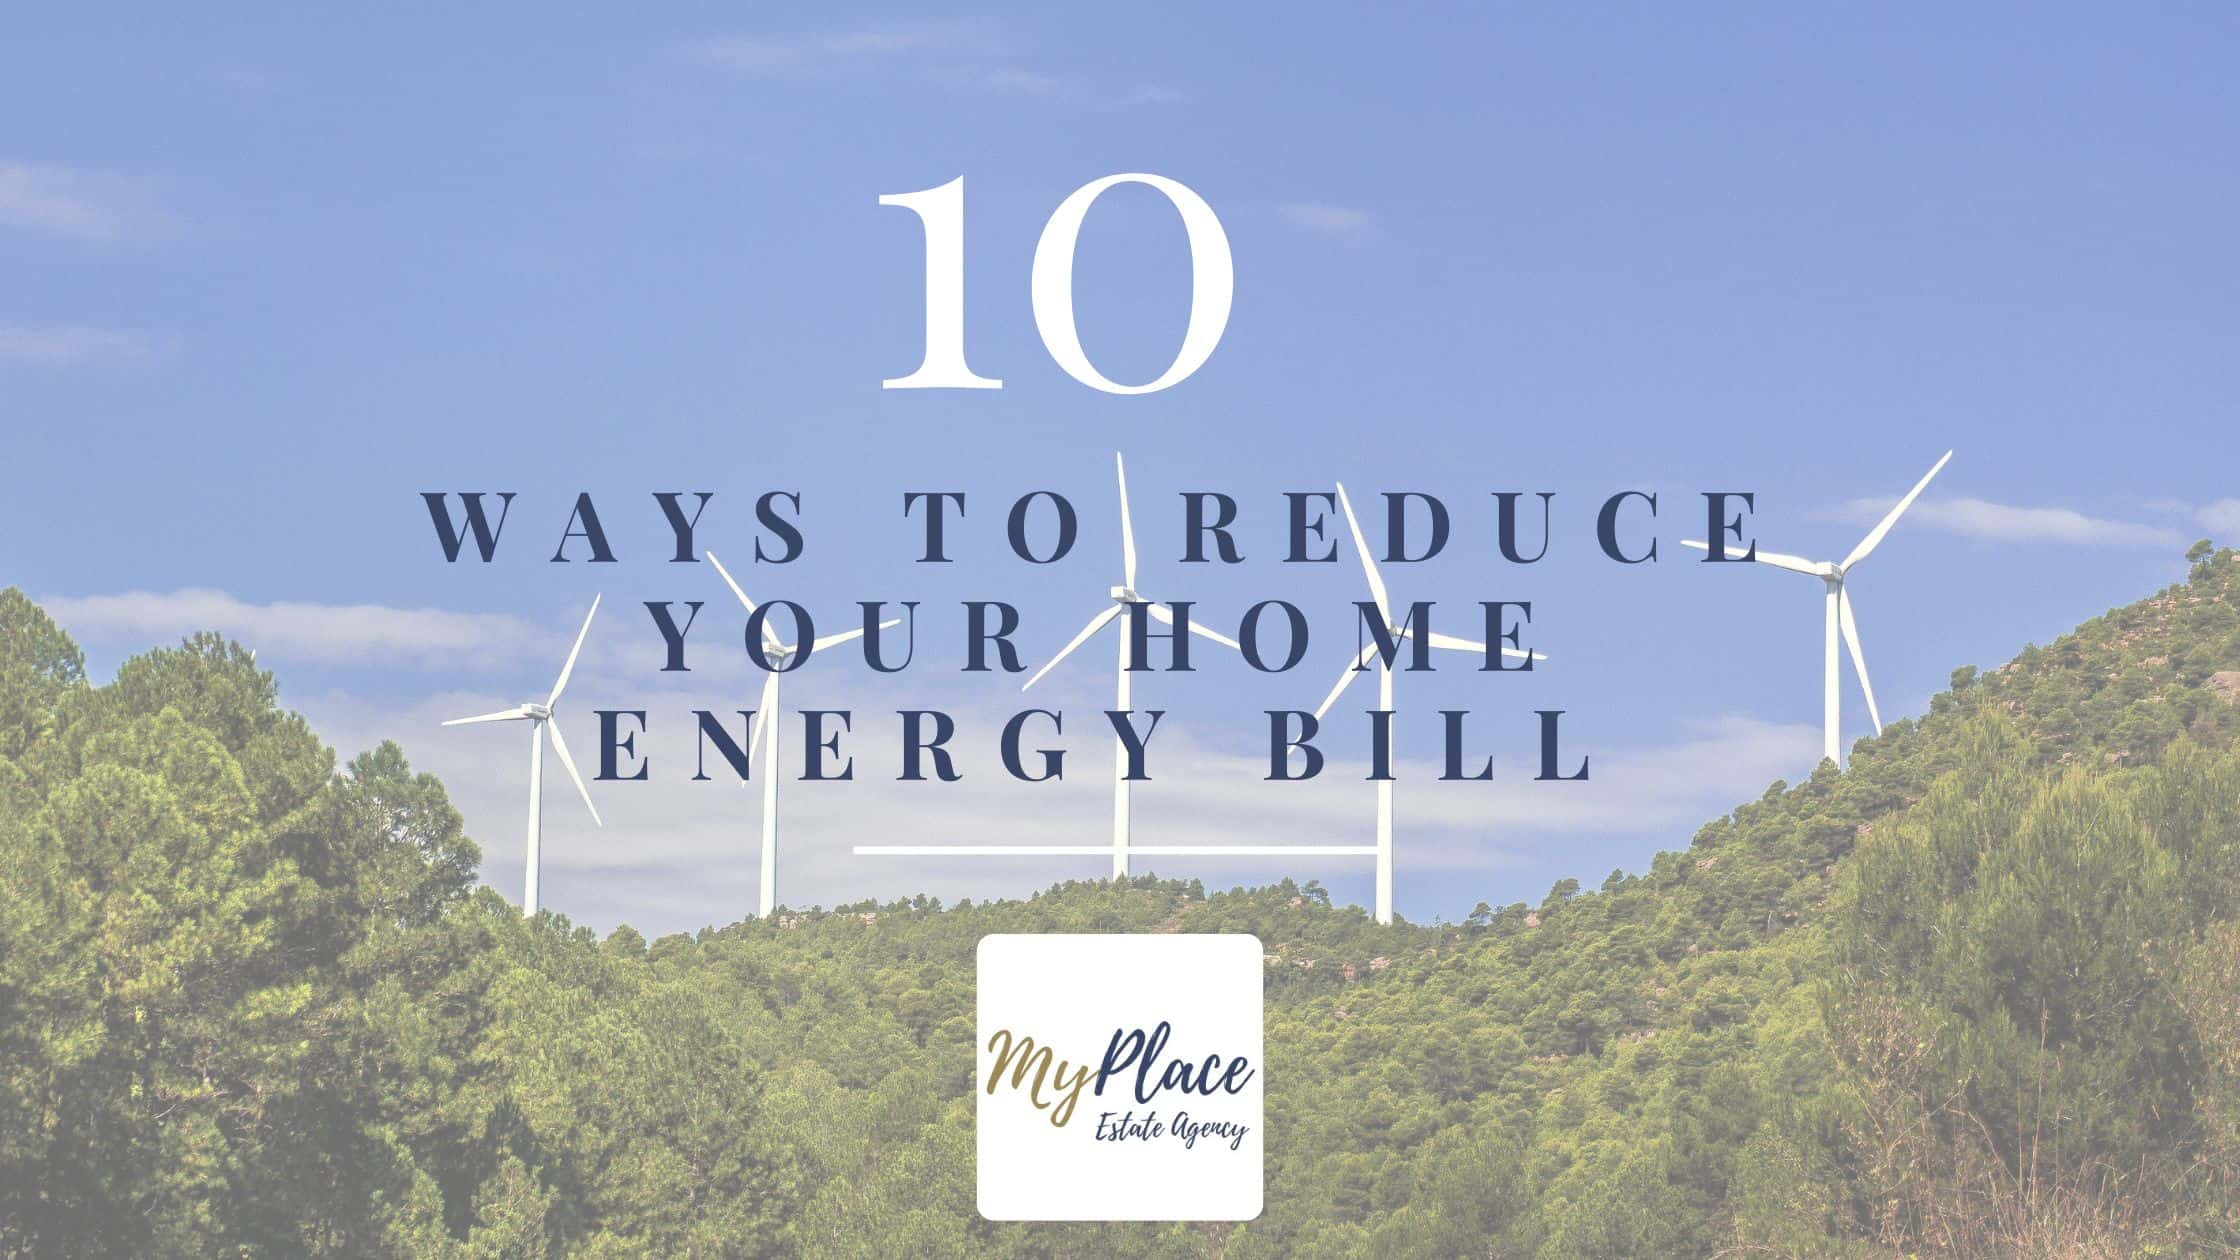 10 ways to reduce your home energy bills